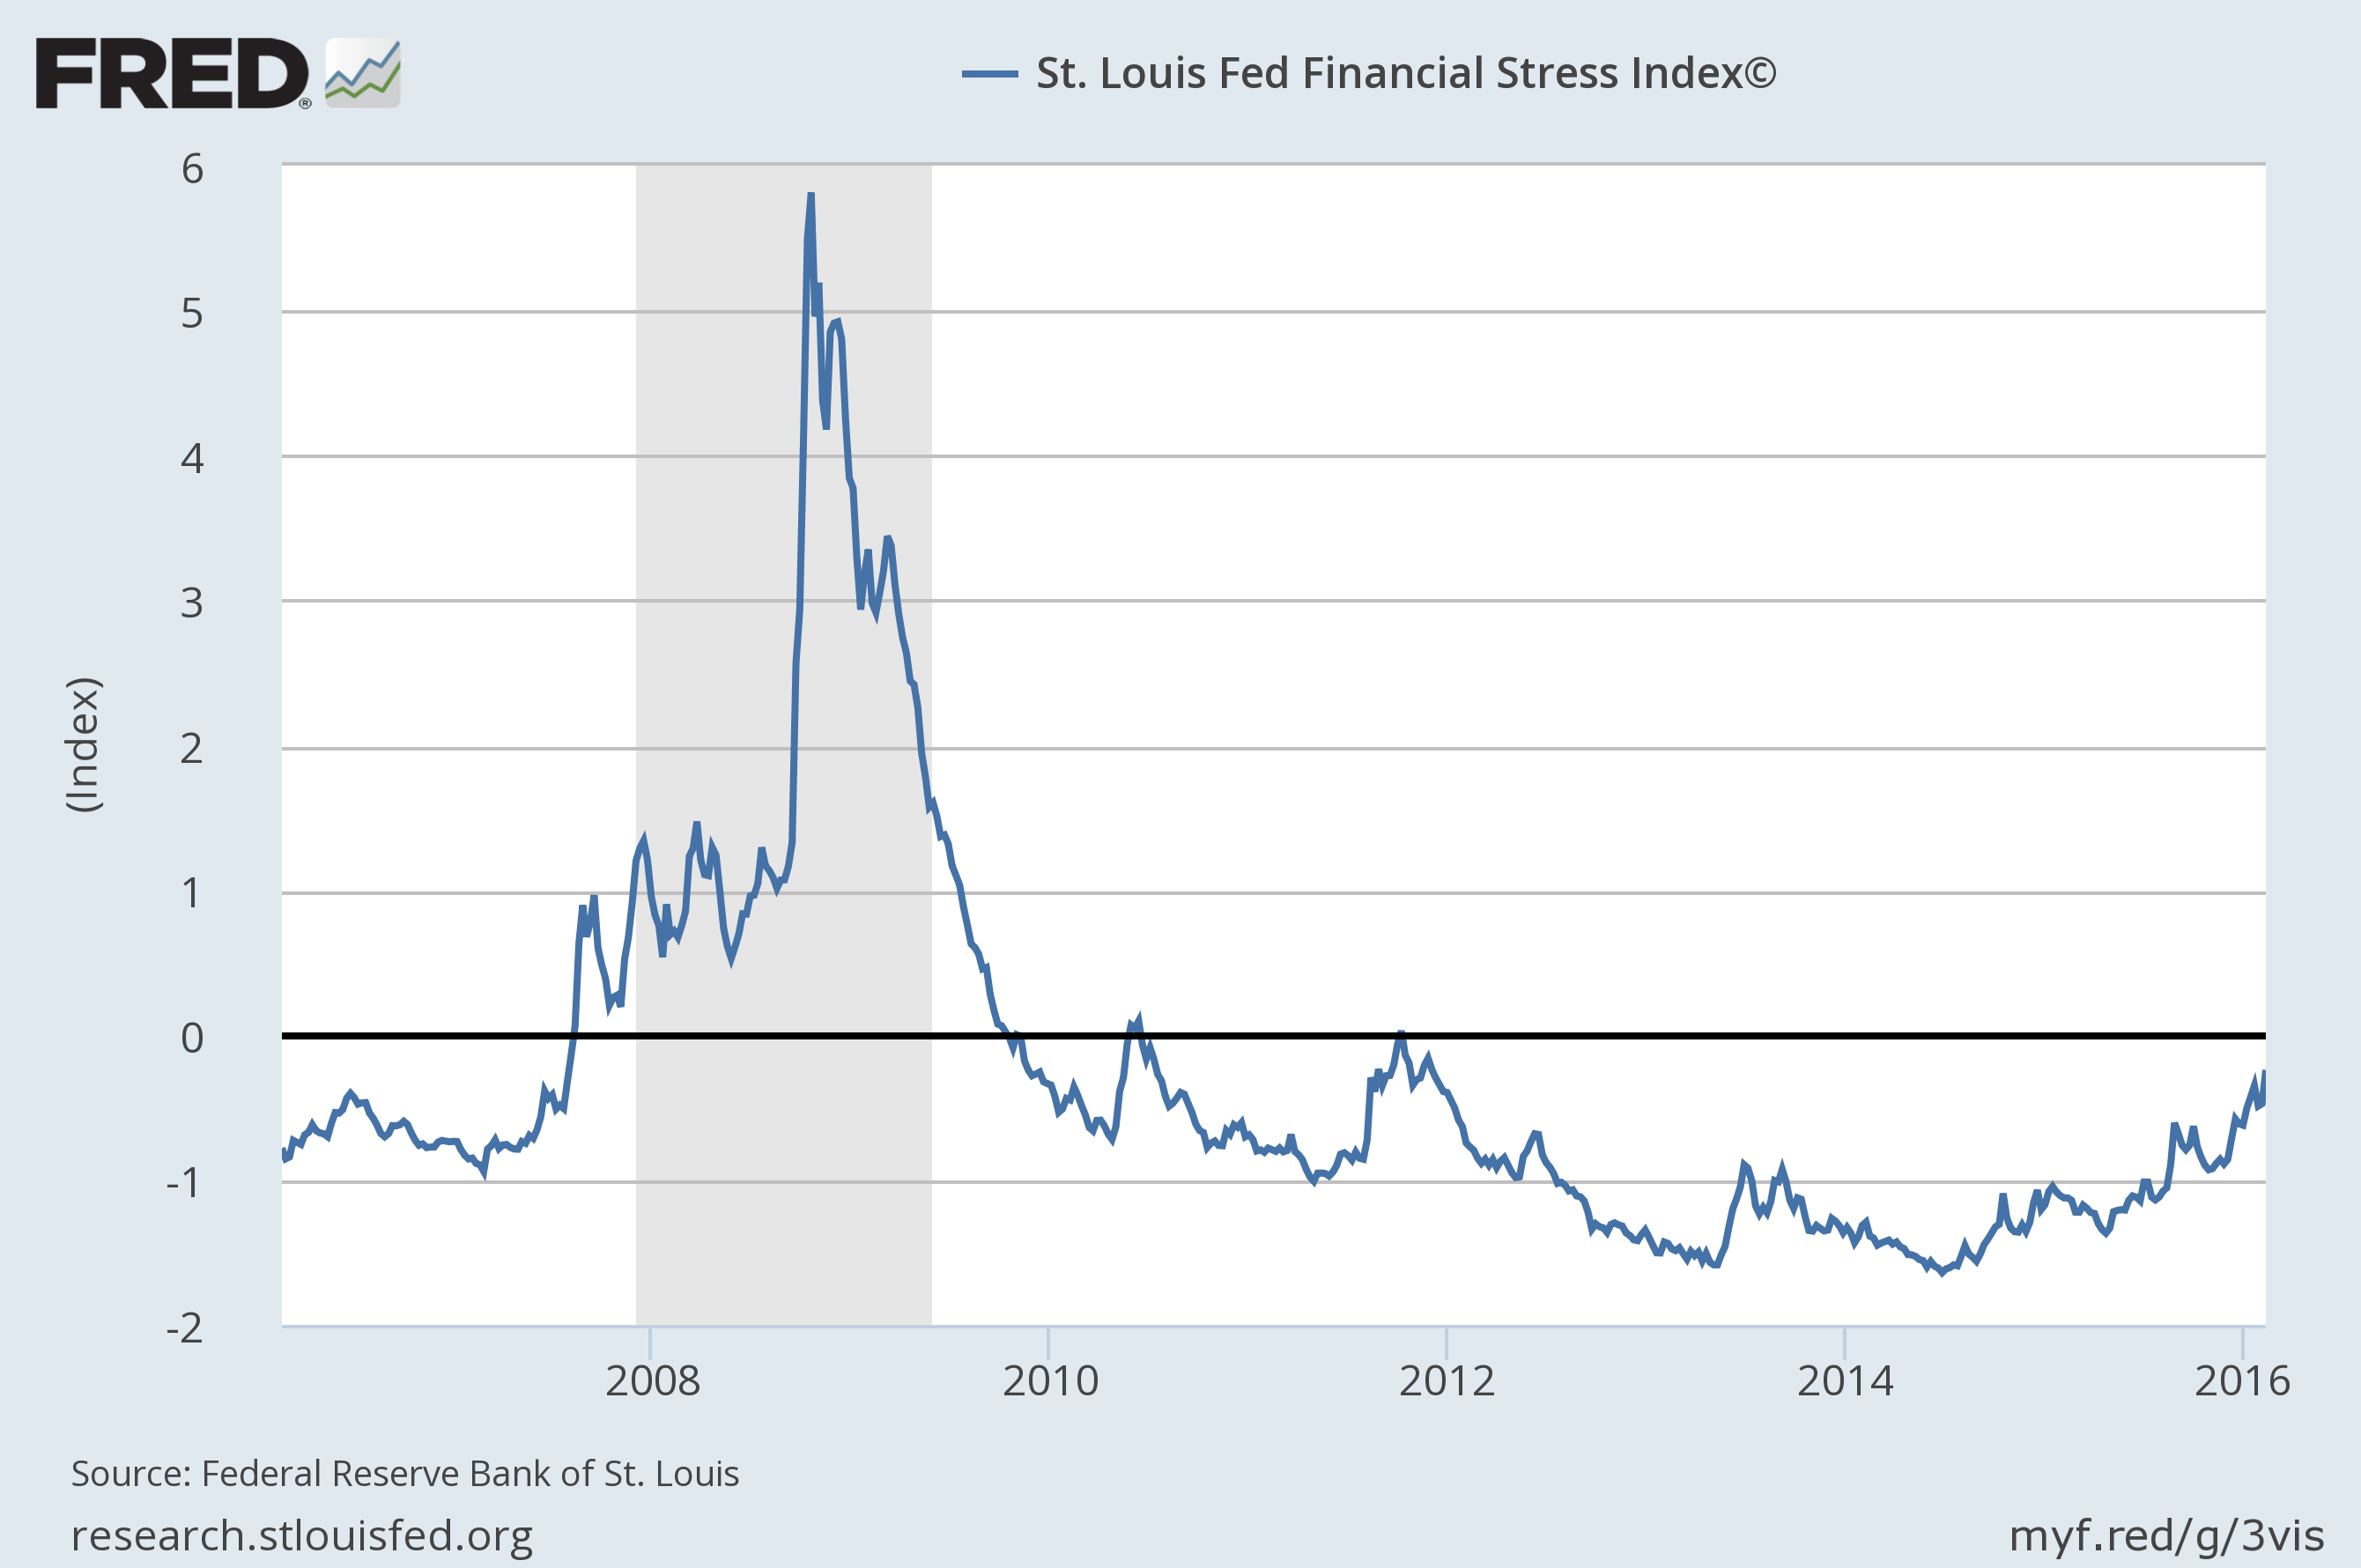 St. Louis Fed Financial Stress Index 2006-2016